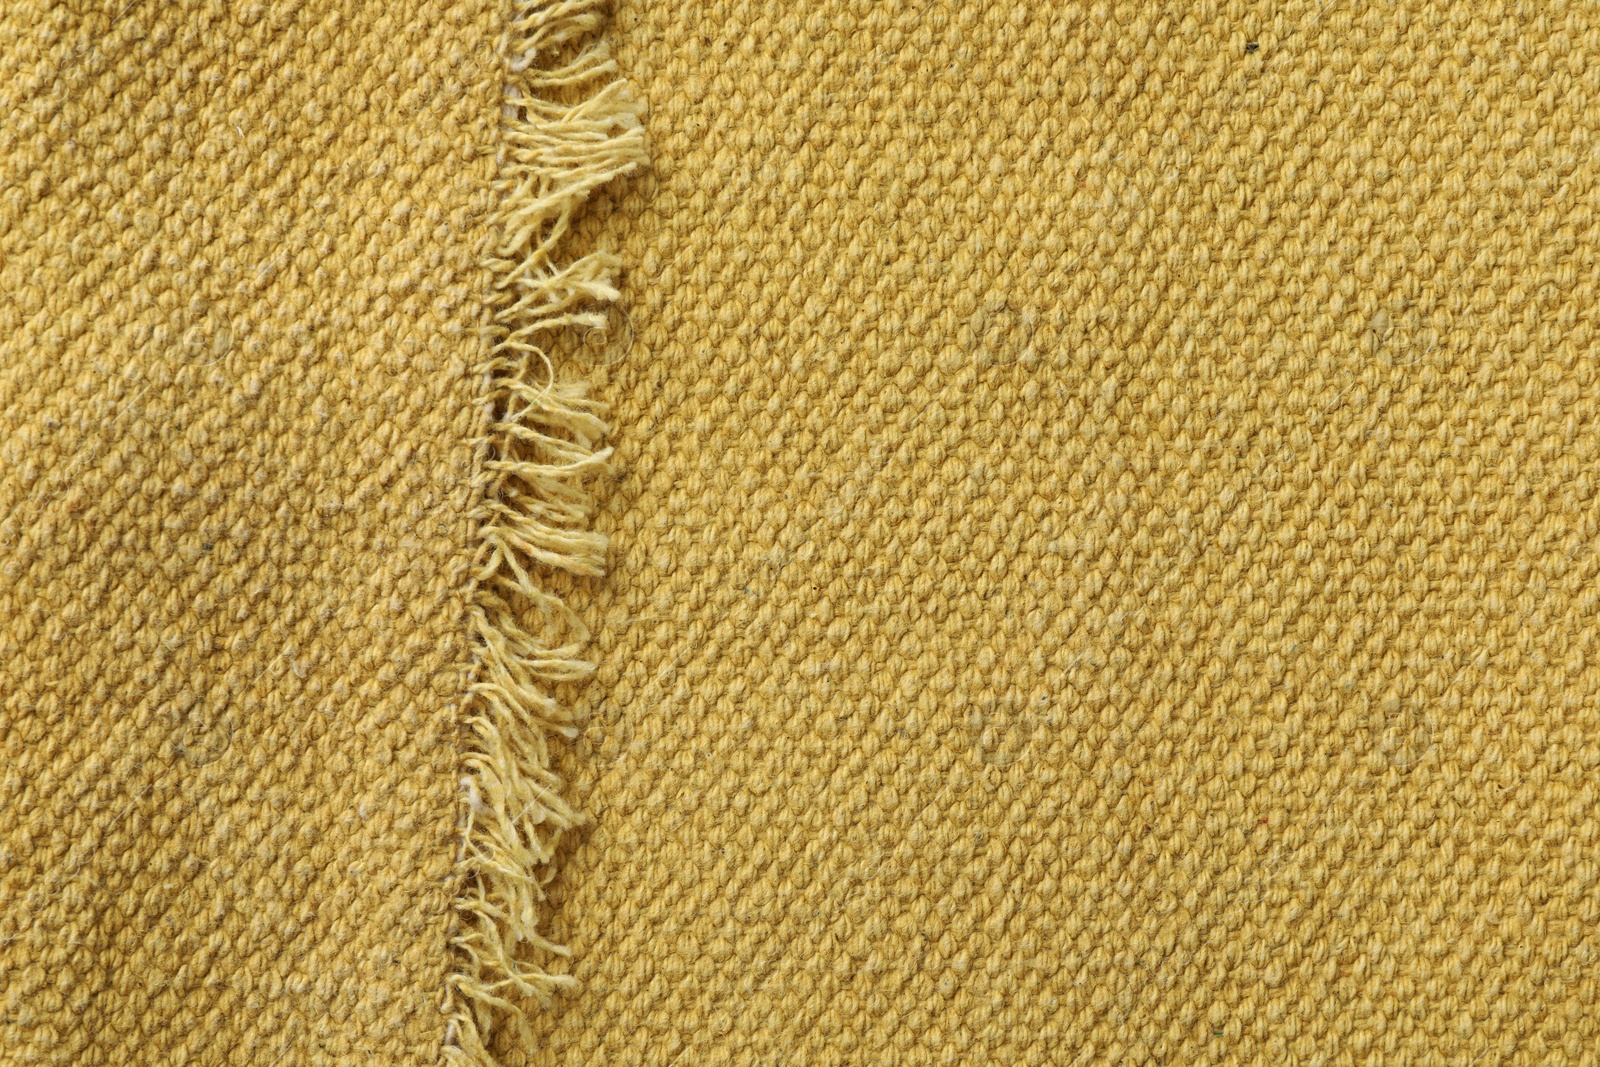 Photo of Texture of golden color fabric as background, top view